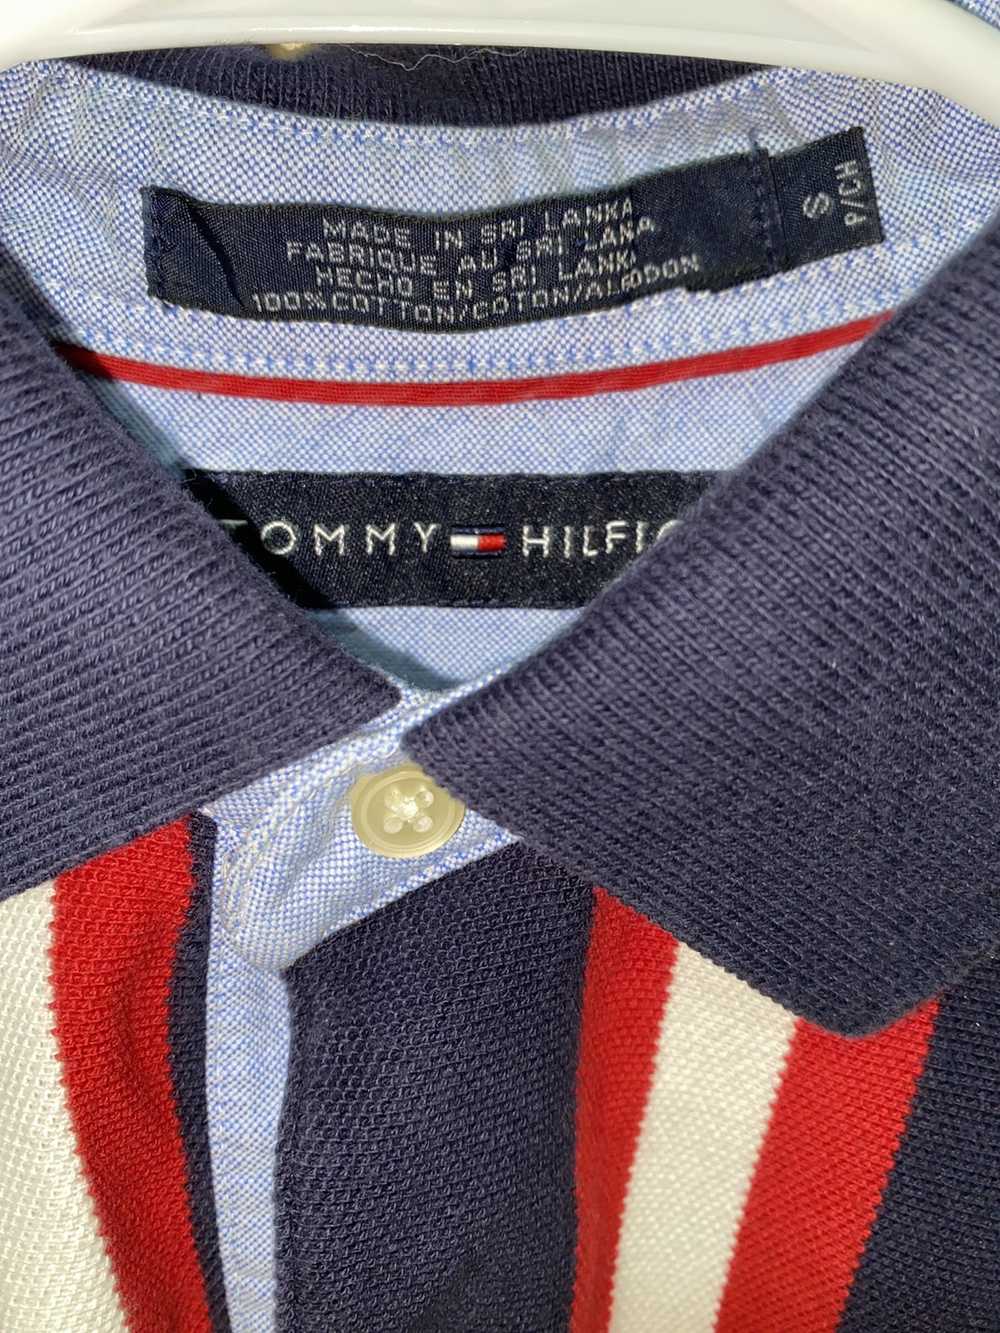 Tommy Hilfiger Tommy Hilfiger Red White Blue Polo - image 3